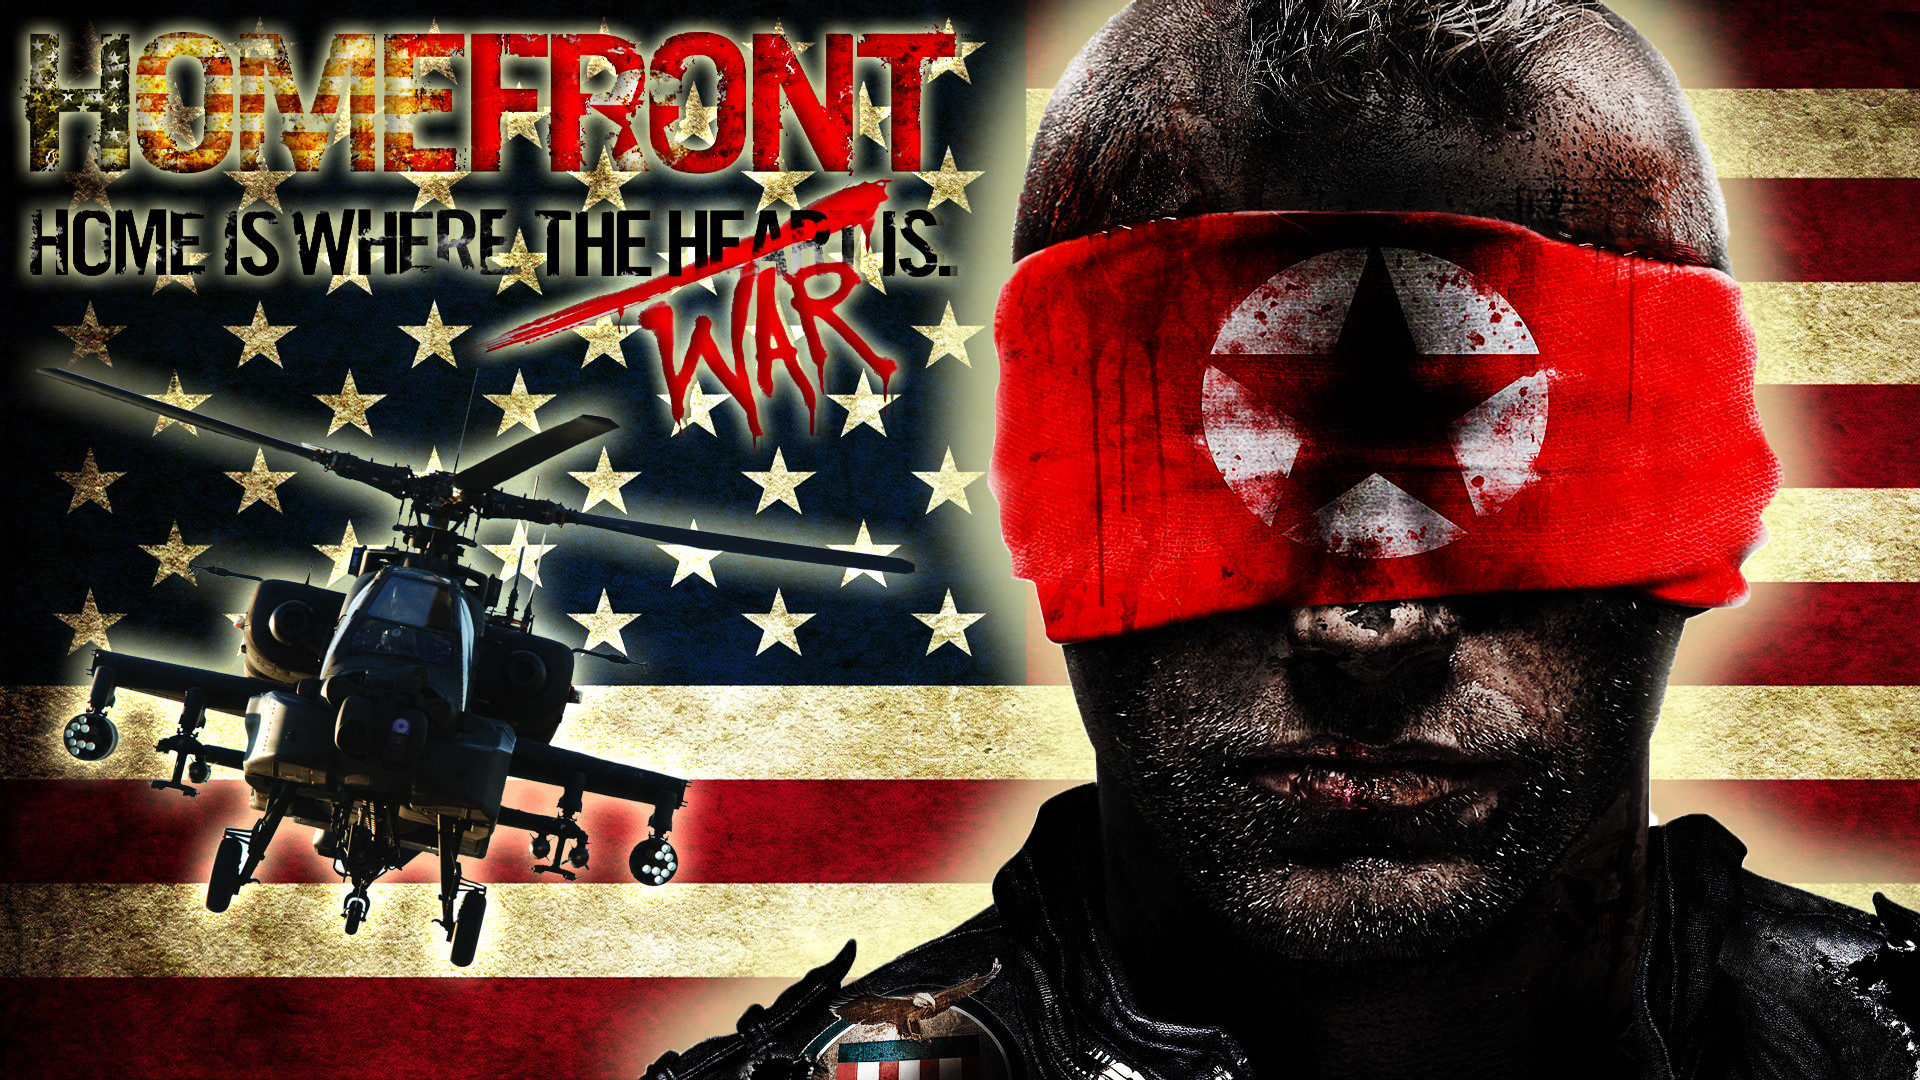 1920x1080 Homefront Wallpaper by checkergermany Homefront Wallpaper by checkergermany